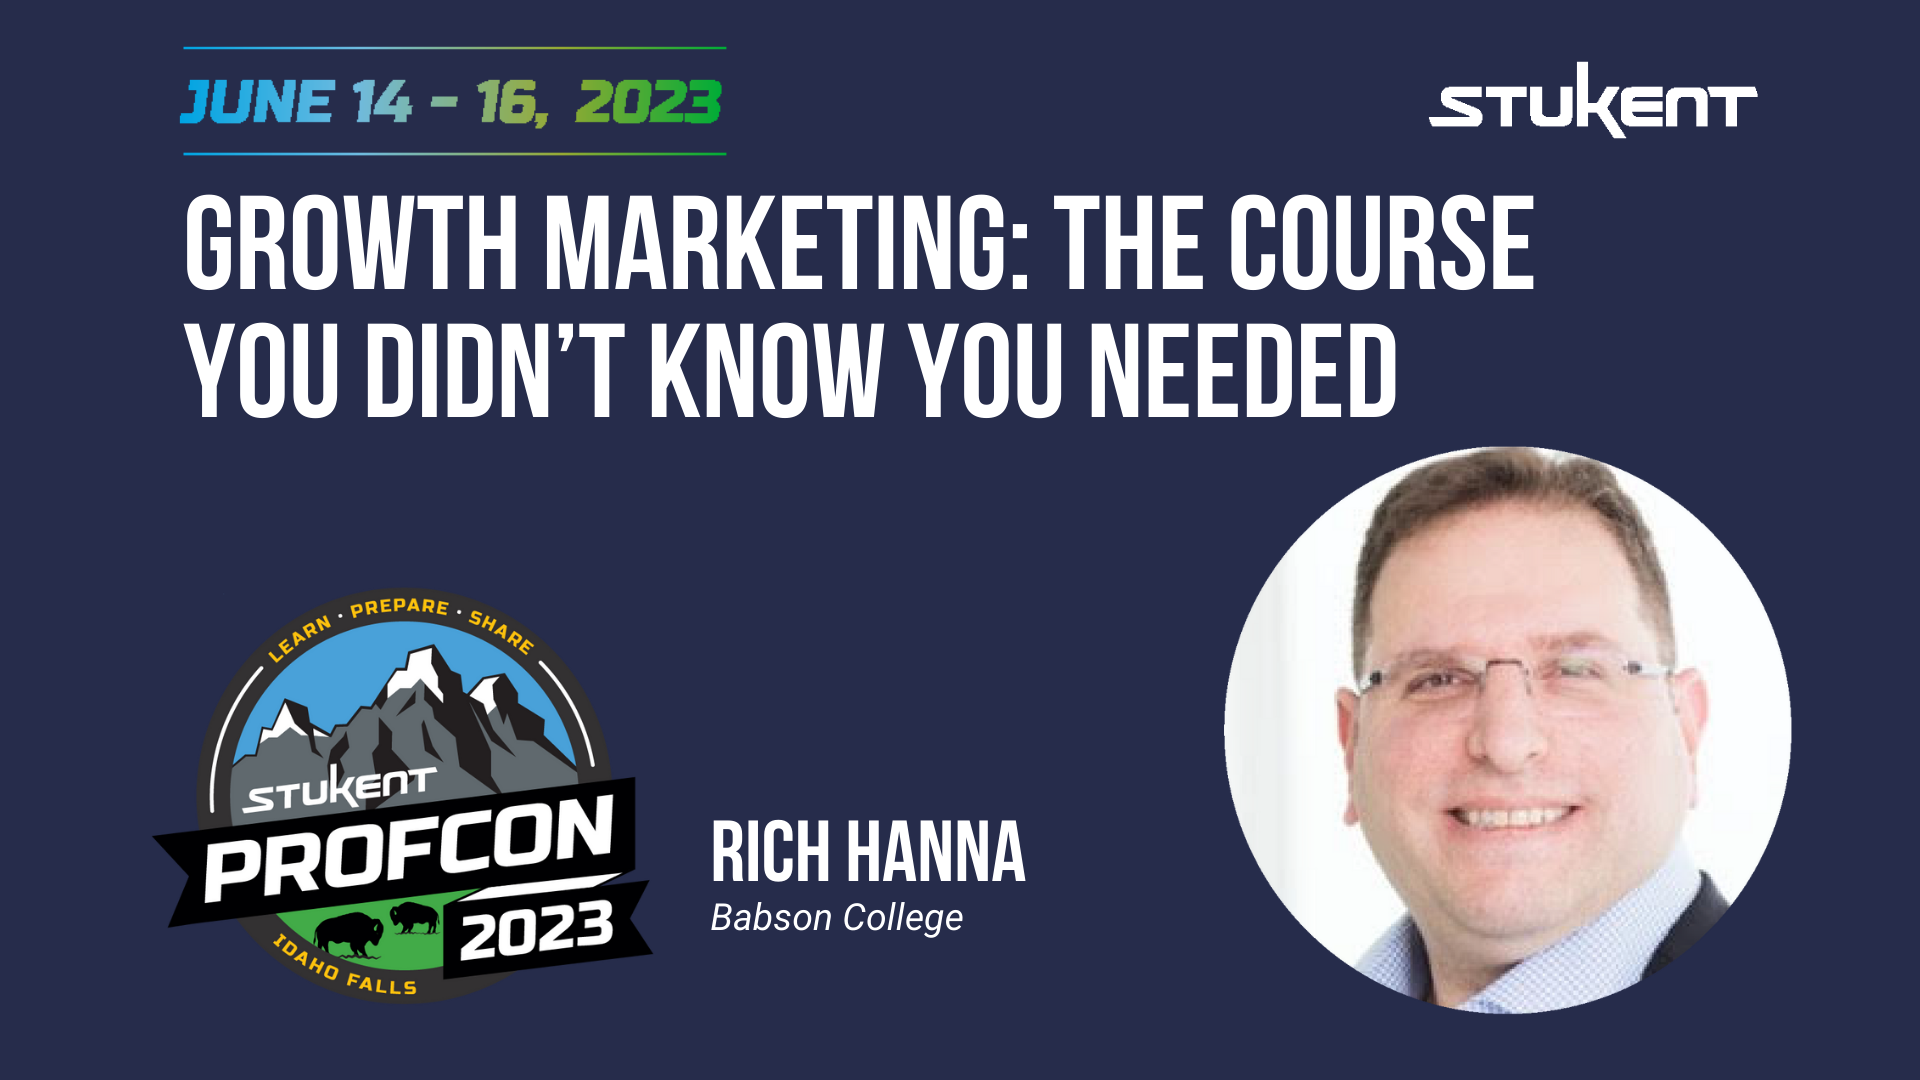 Growth Marketing: The Course You Didn’t Know You Needed